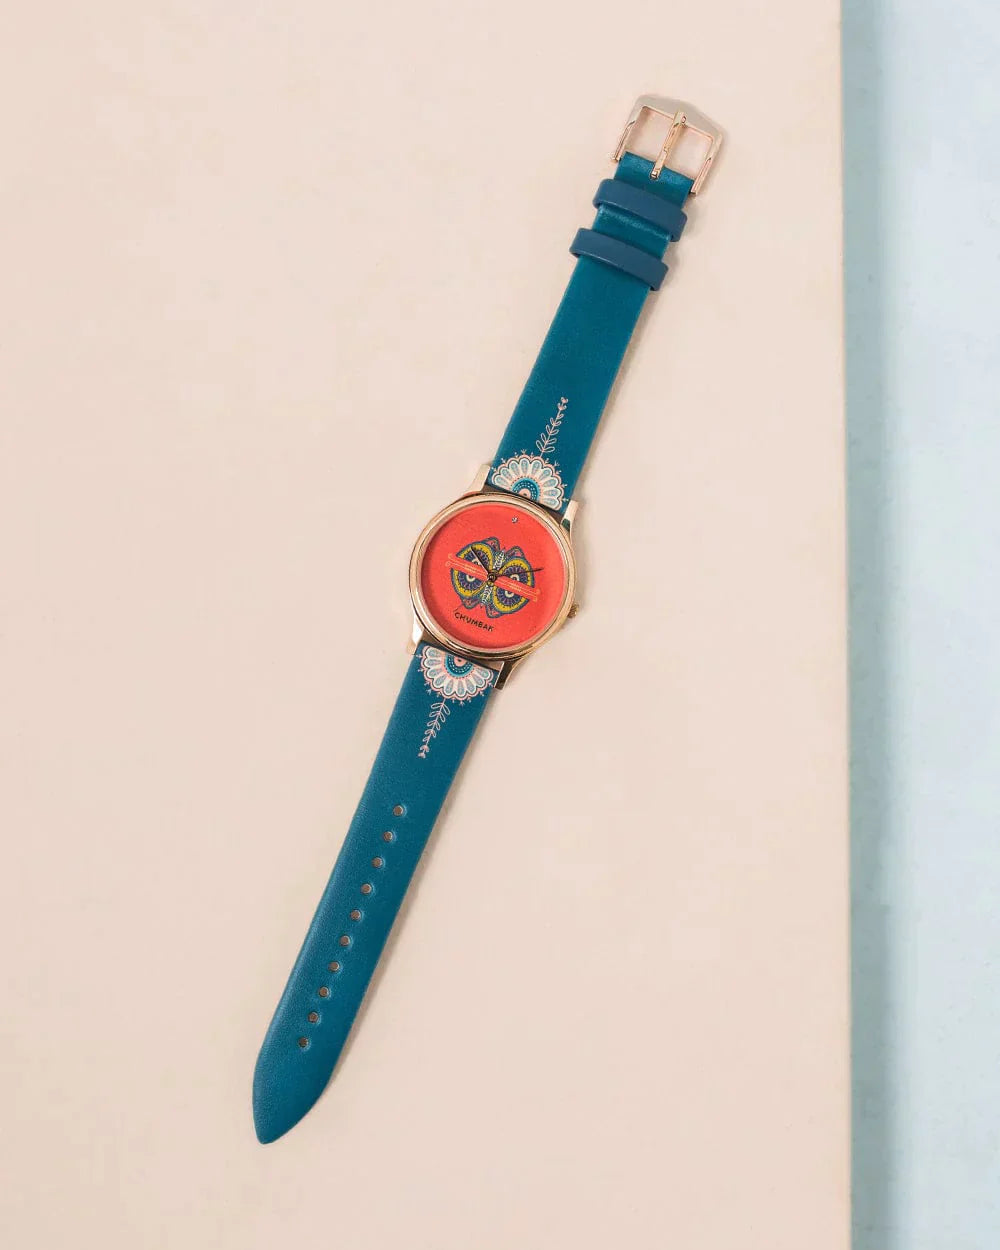 Teal By Chumbak Analog Watch - For Women - Price History